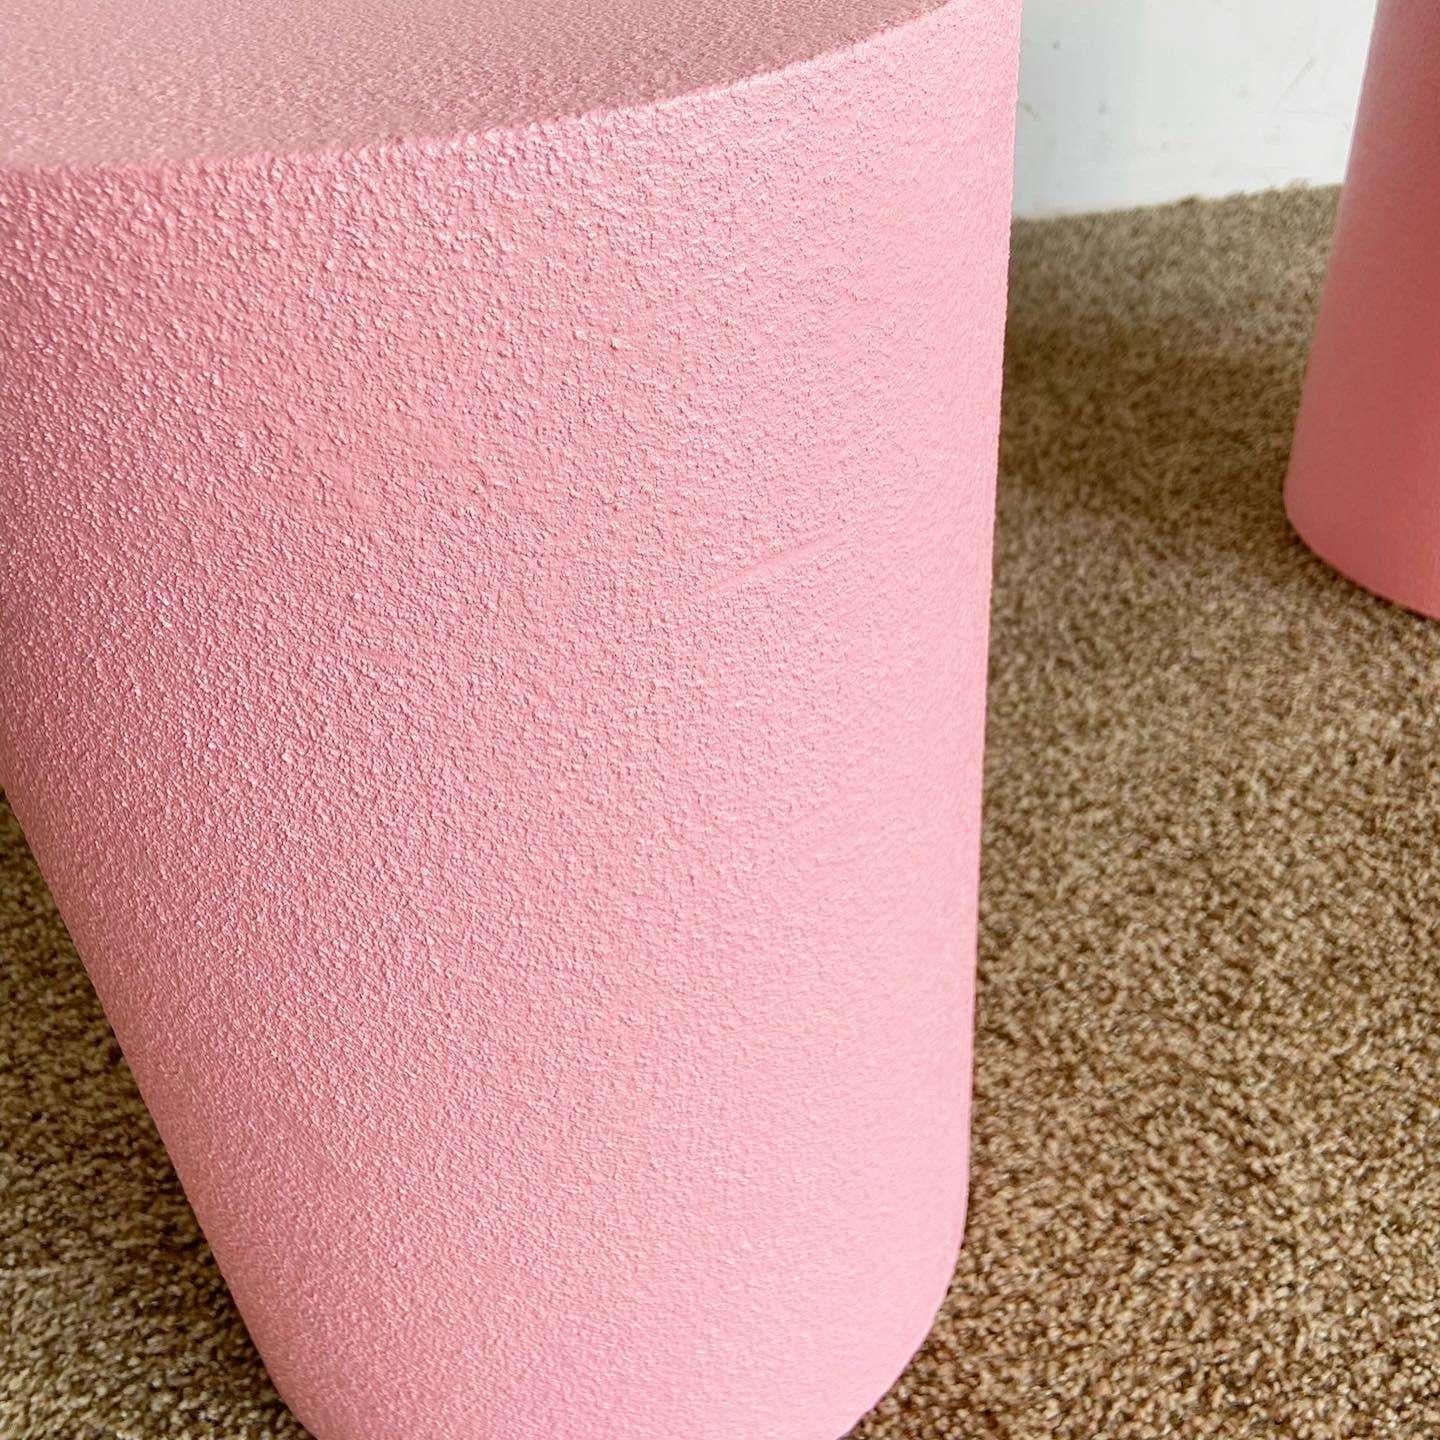 Postmodern Pink Textured Finish Cylindrical Pedestals - a Pair For Sale 1